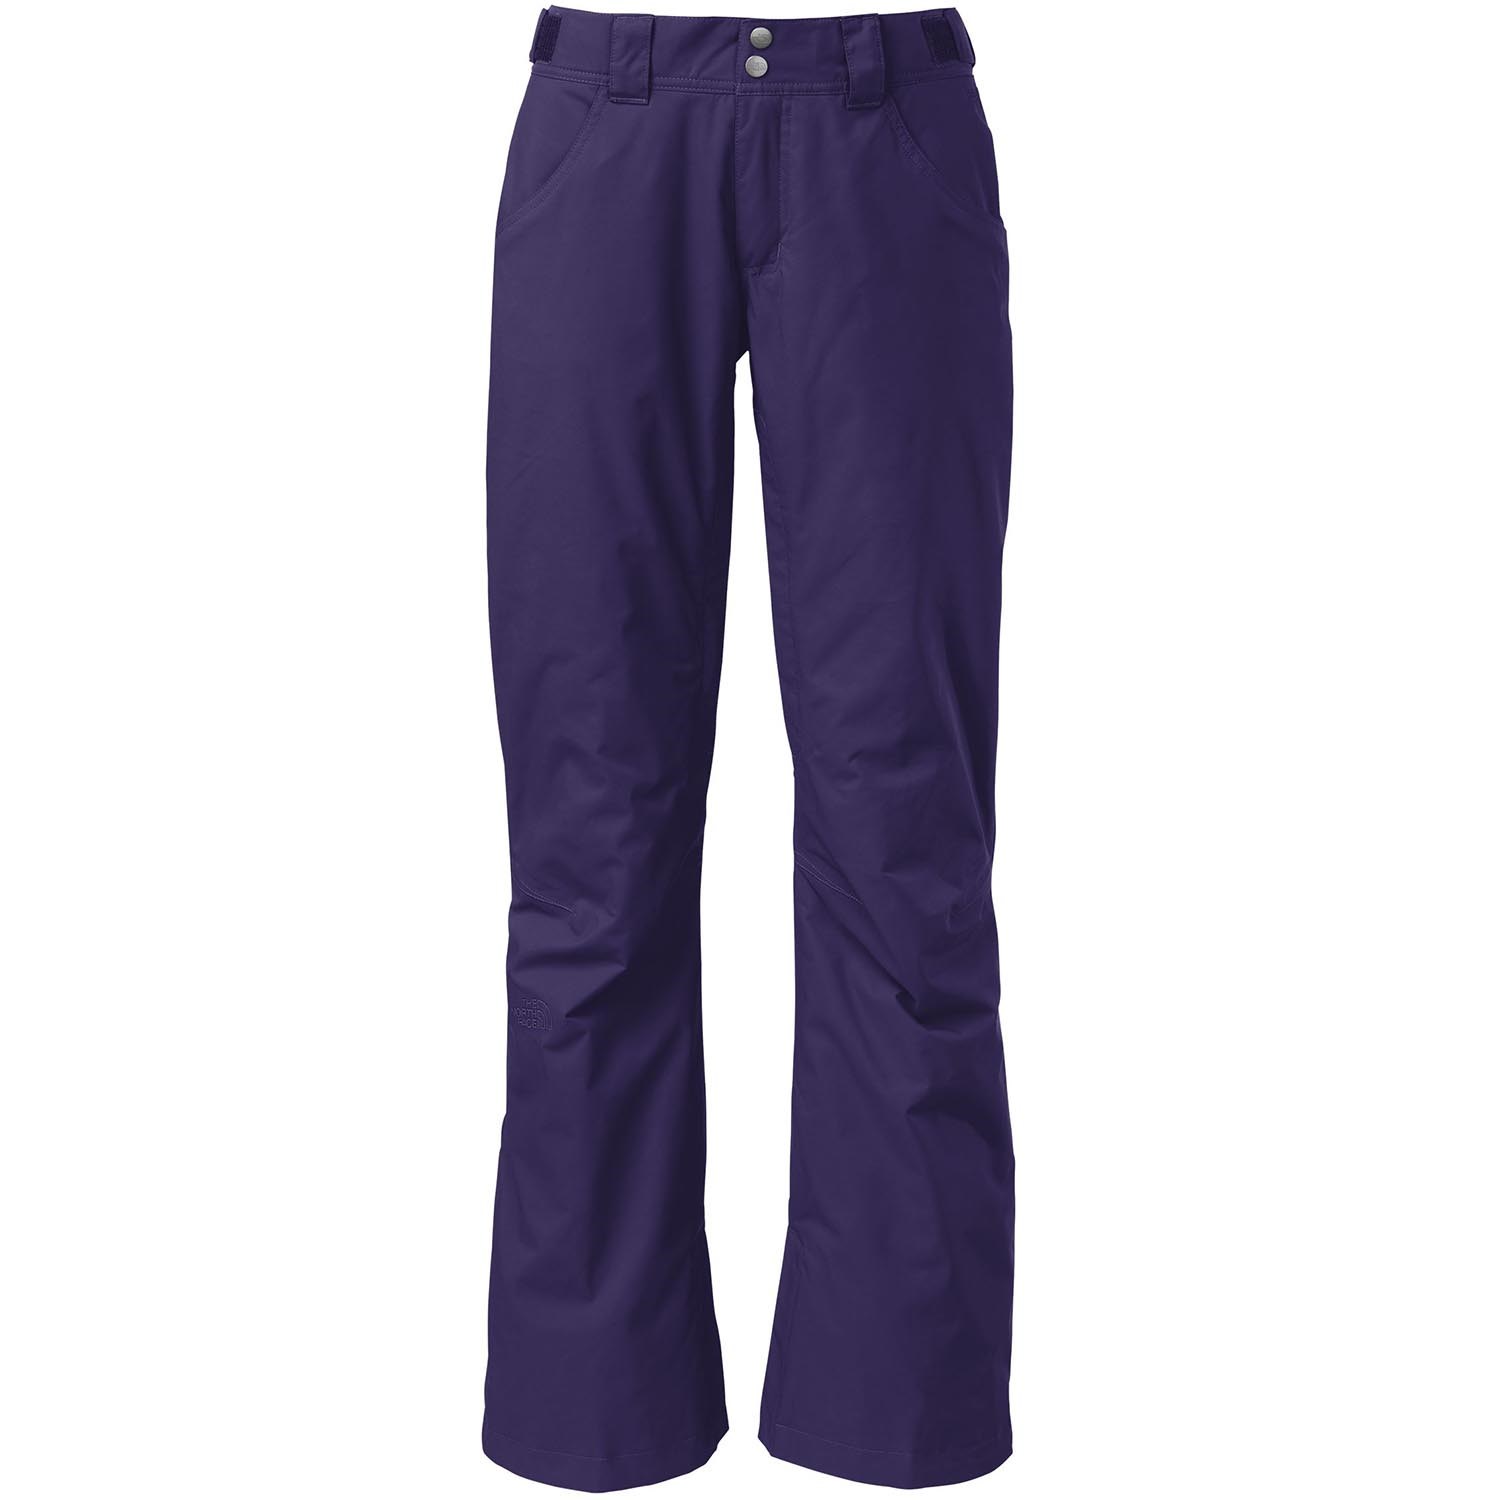 W FARROWS PANT, The North Face